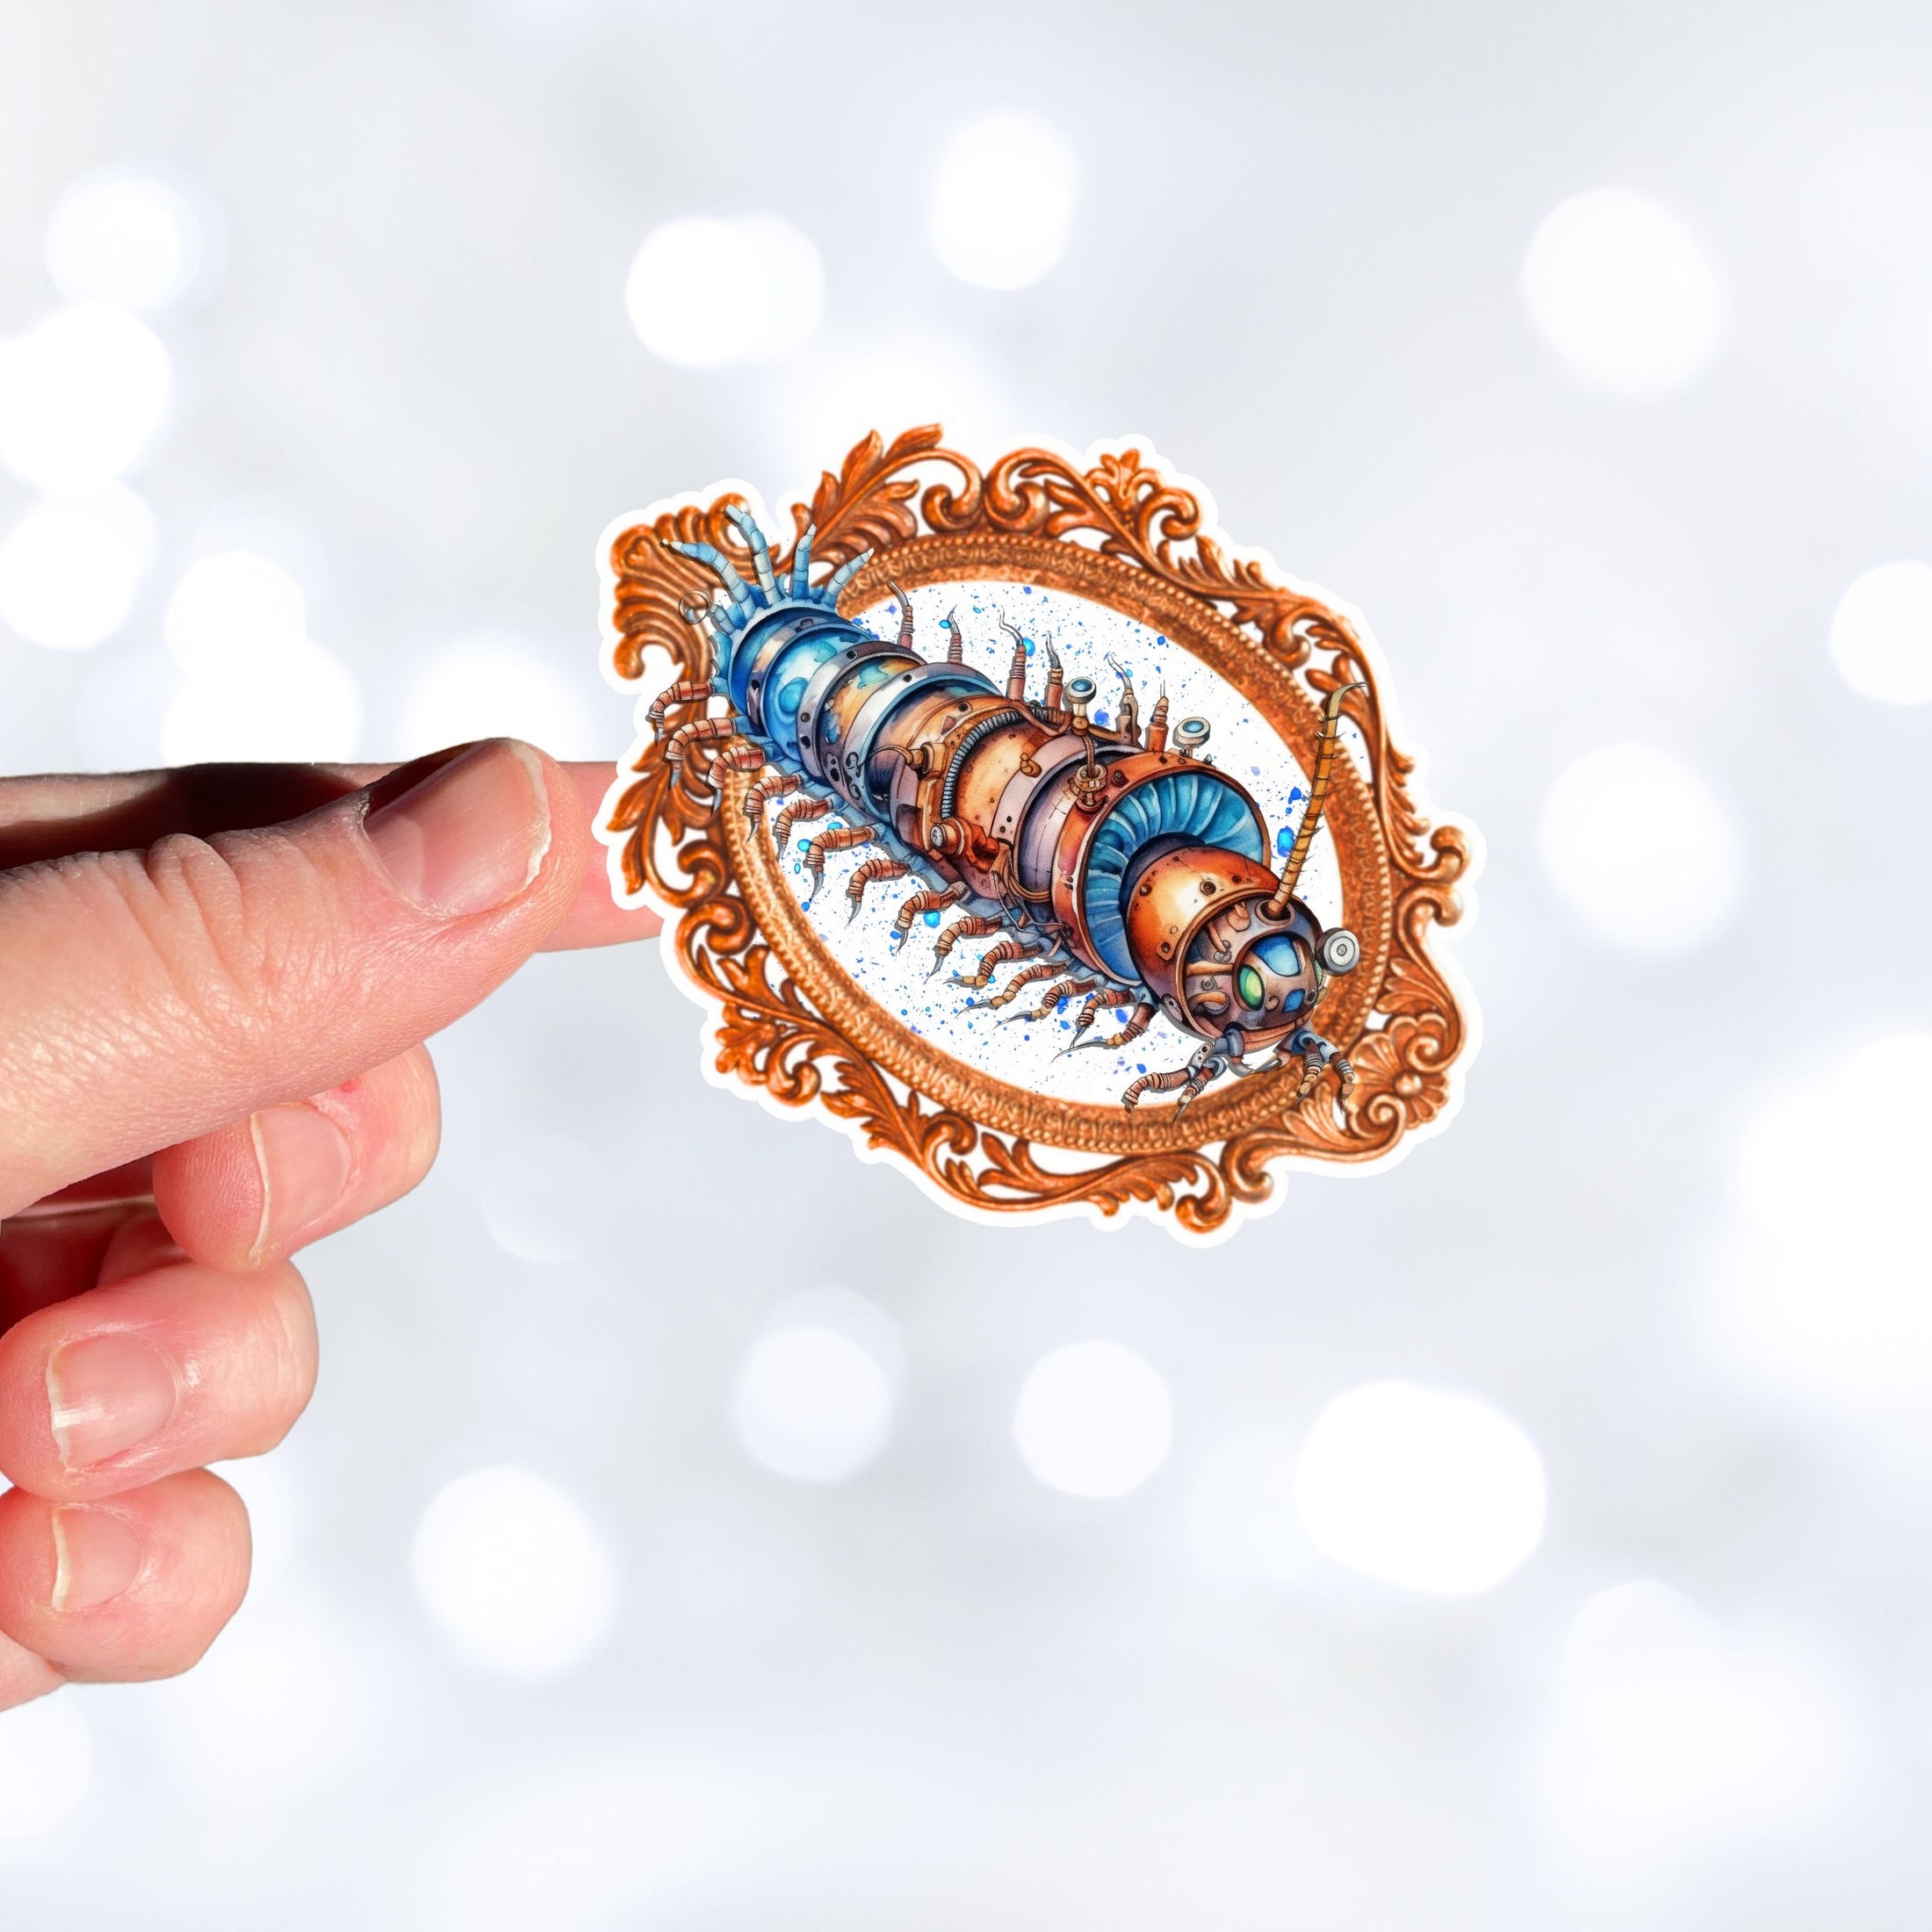 This image shows a hand holding the steampunk centipede sticker.